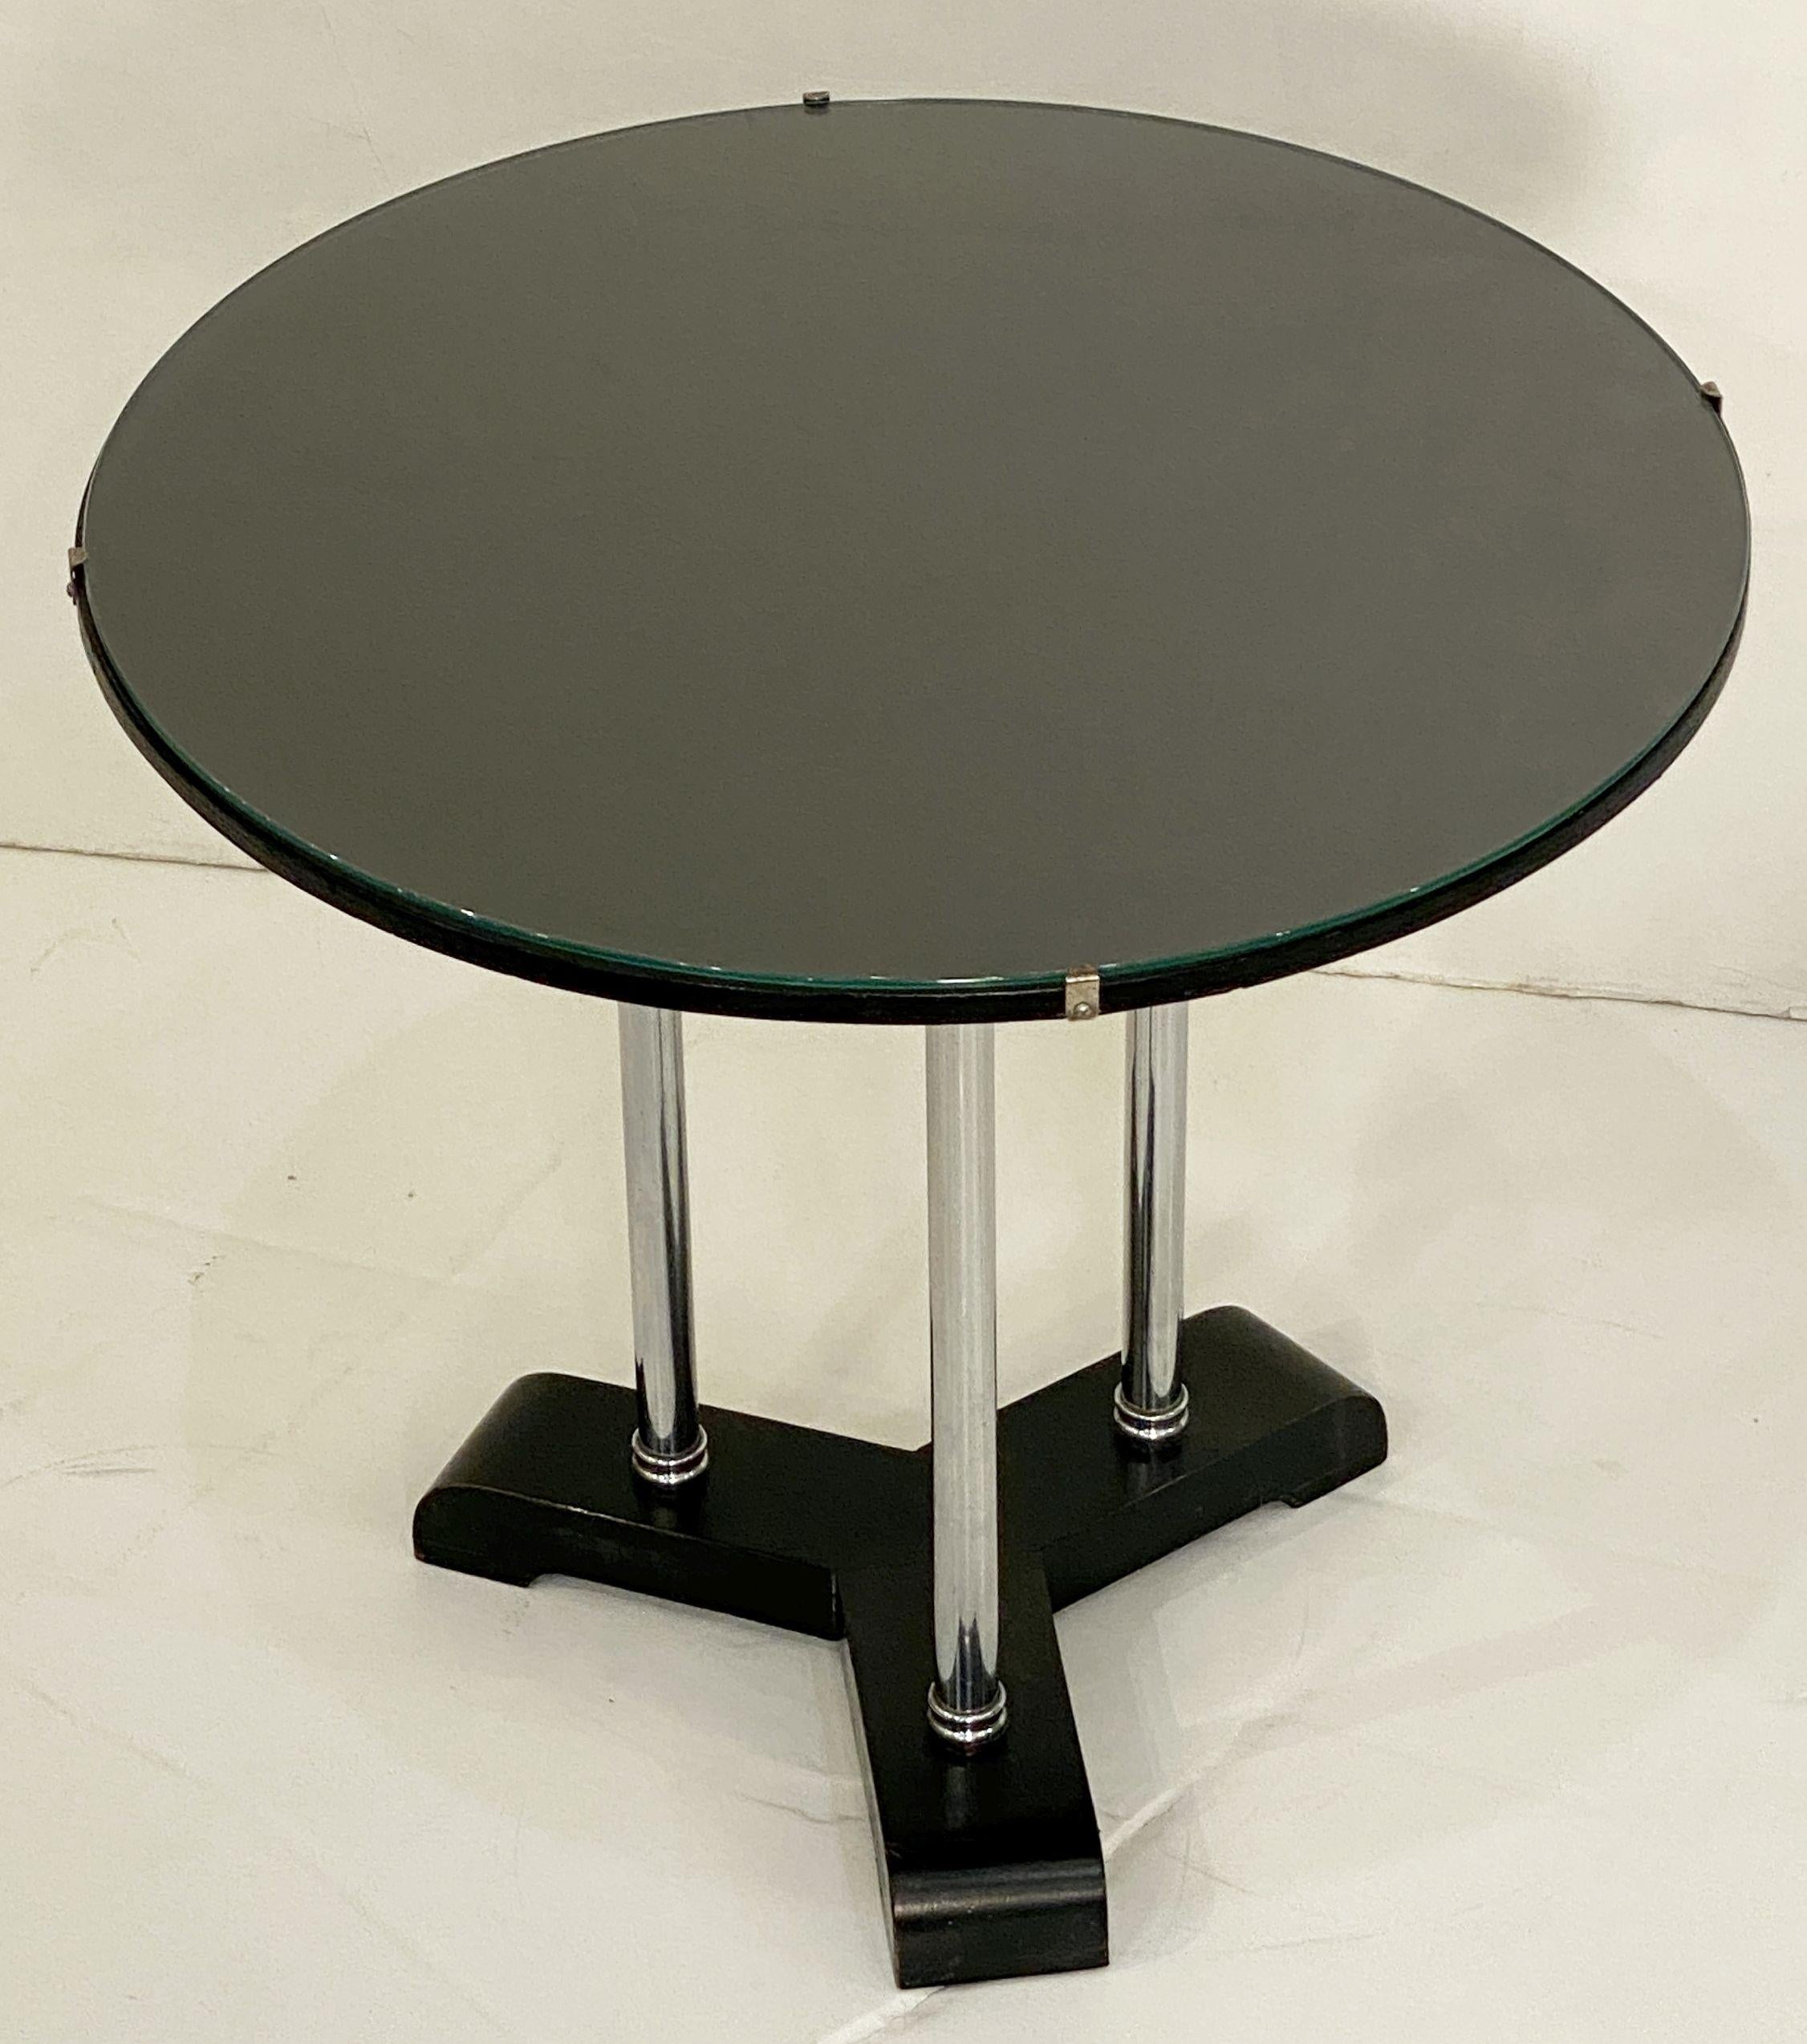 20th Century English Art Deco Round Drinks Tripod Table of Chrome, Ebonized Wood, and Glass For Sale